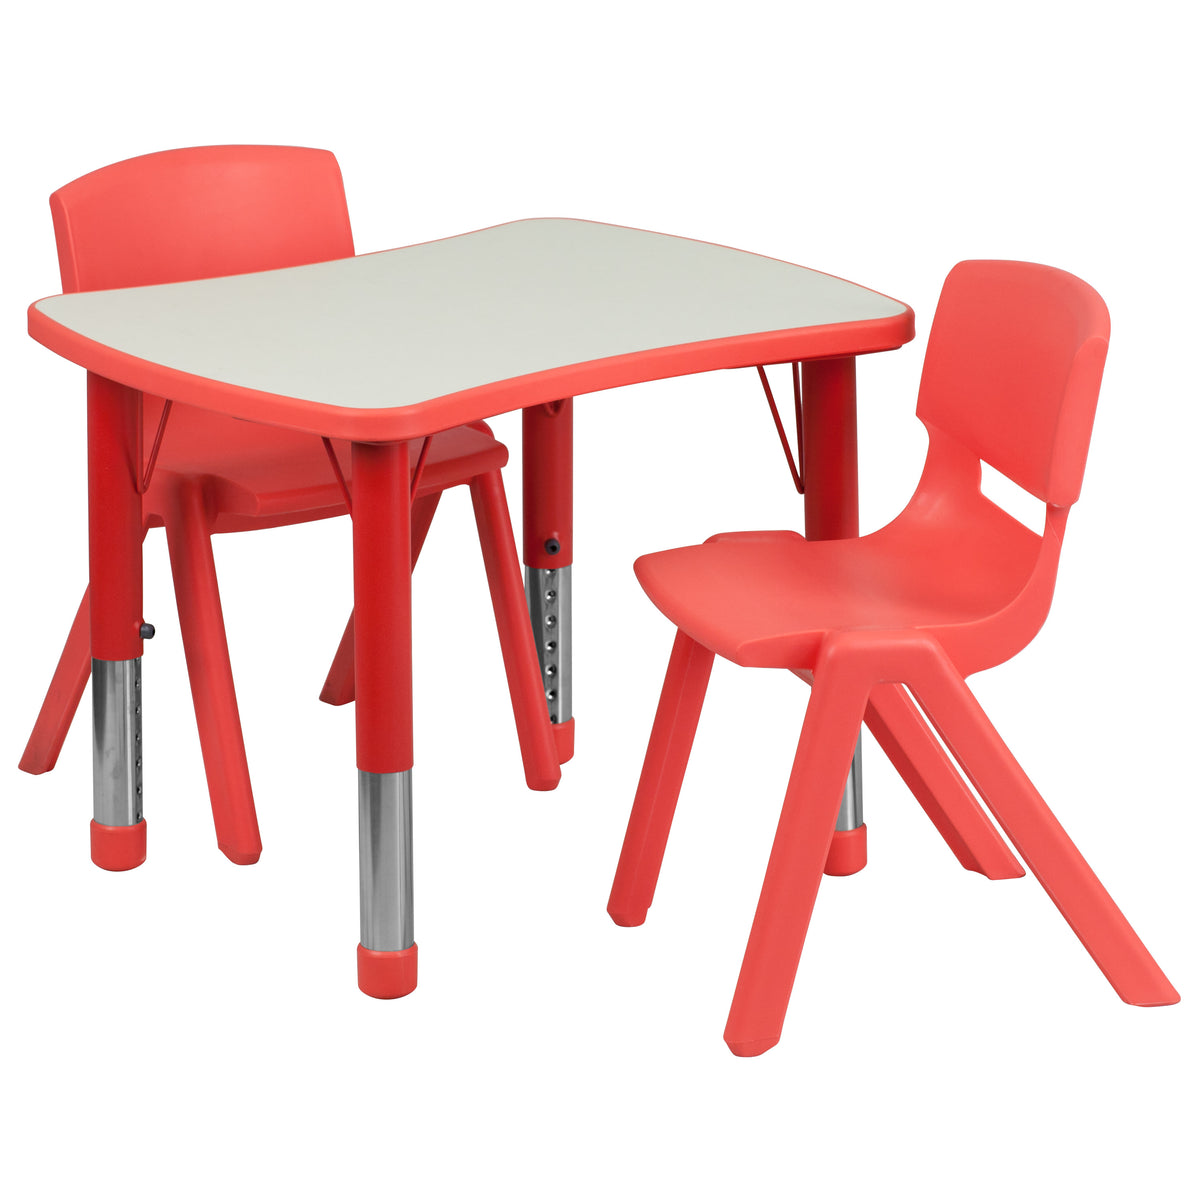 Red |#| 21.875inchW x 26.625inchL Rectangular Red Plastic Activity Table Set with 2 Chairs